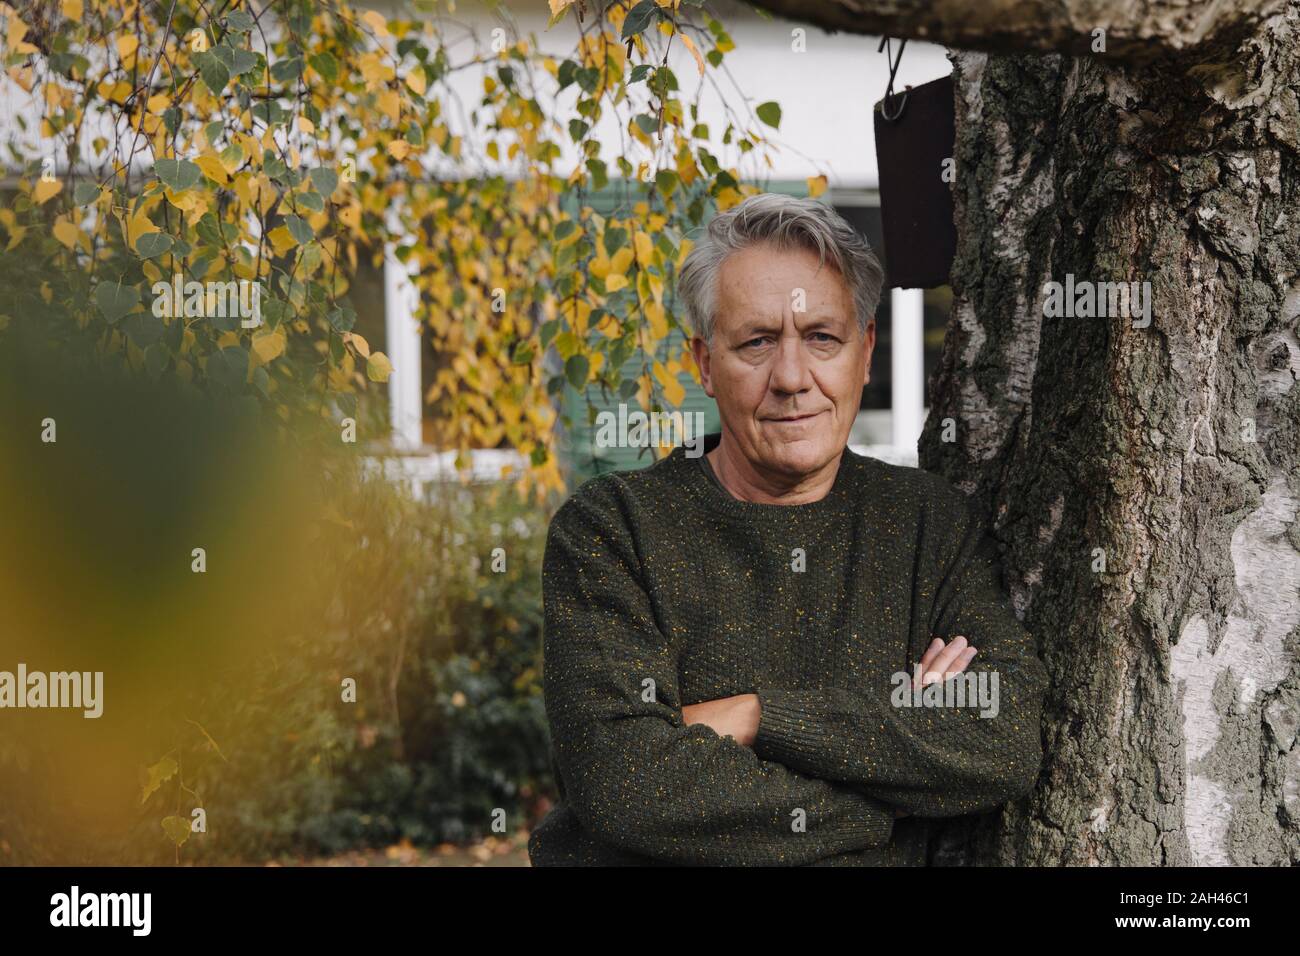 Portrait of a senior man at tree in garden Banque D'Images